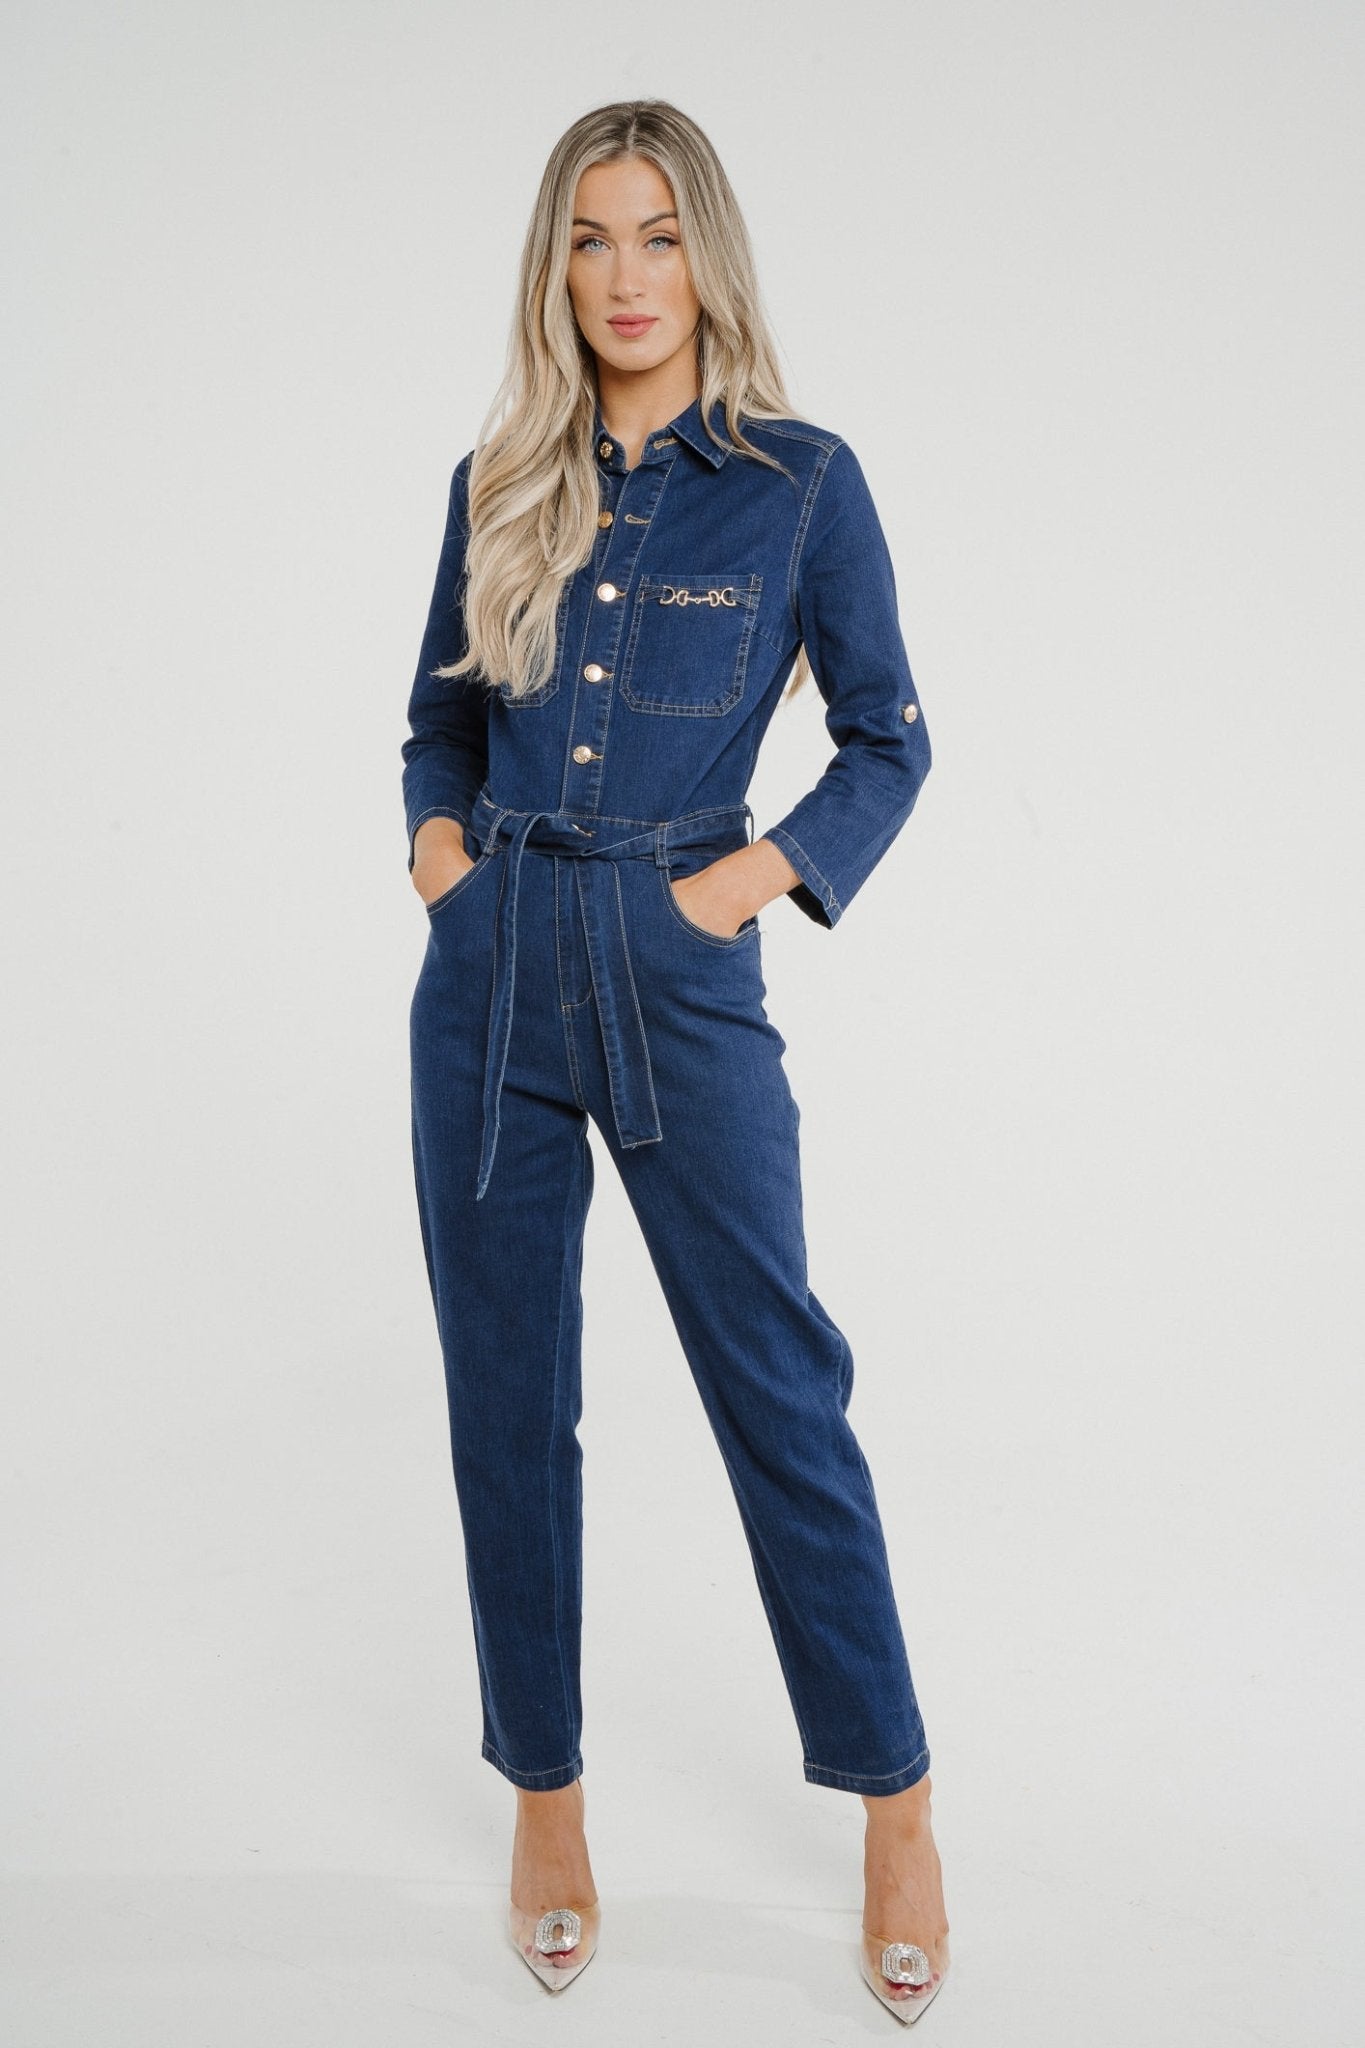 Madewell Balloon Jeans Are Just $29.99 - Parade